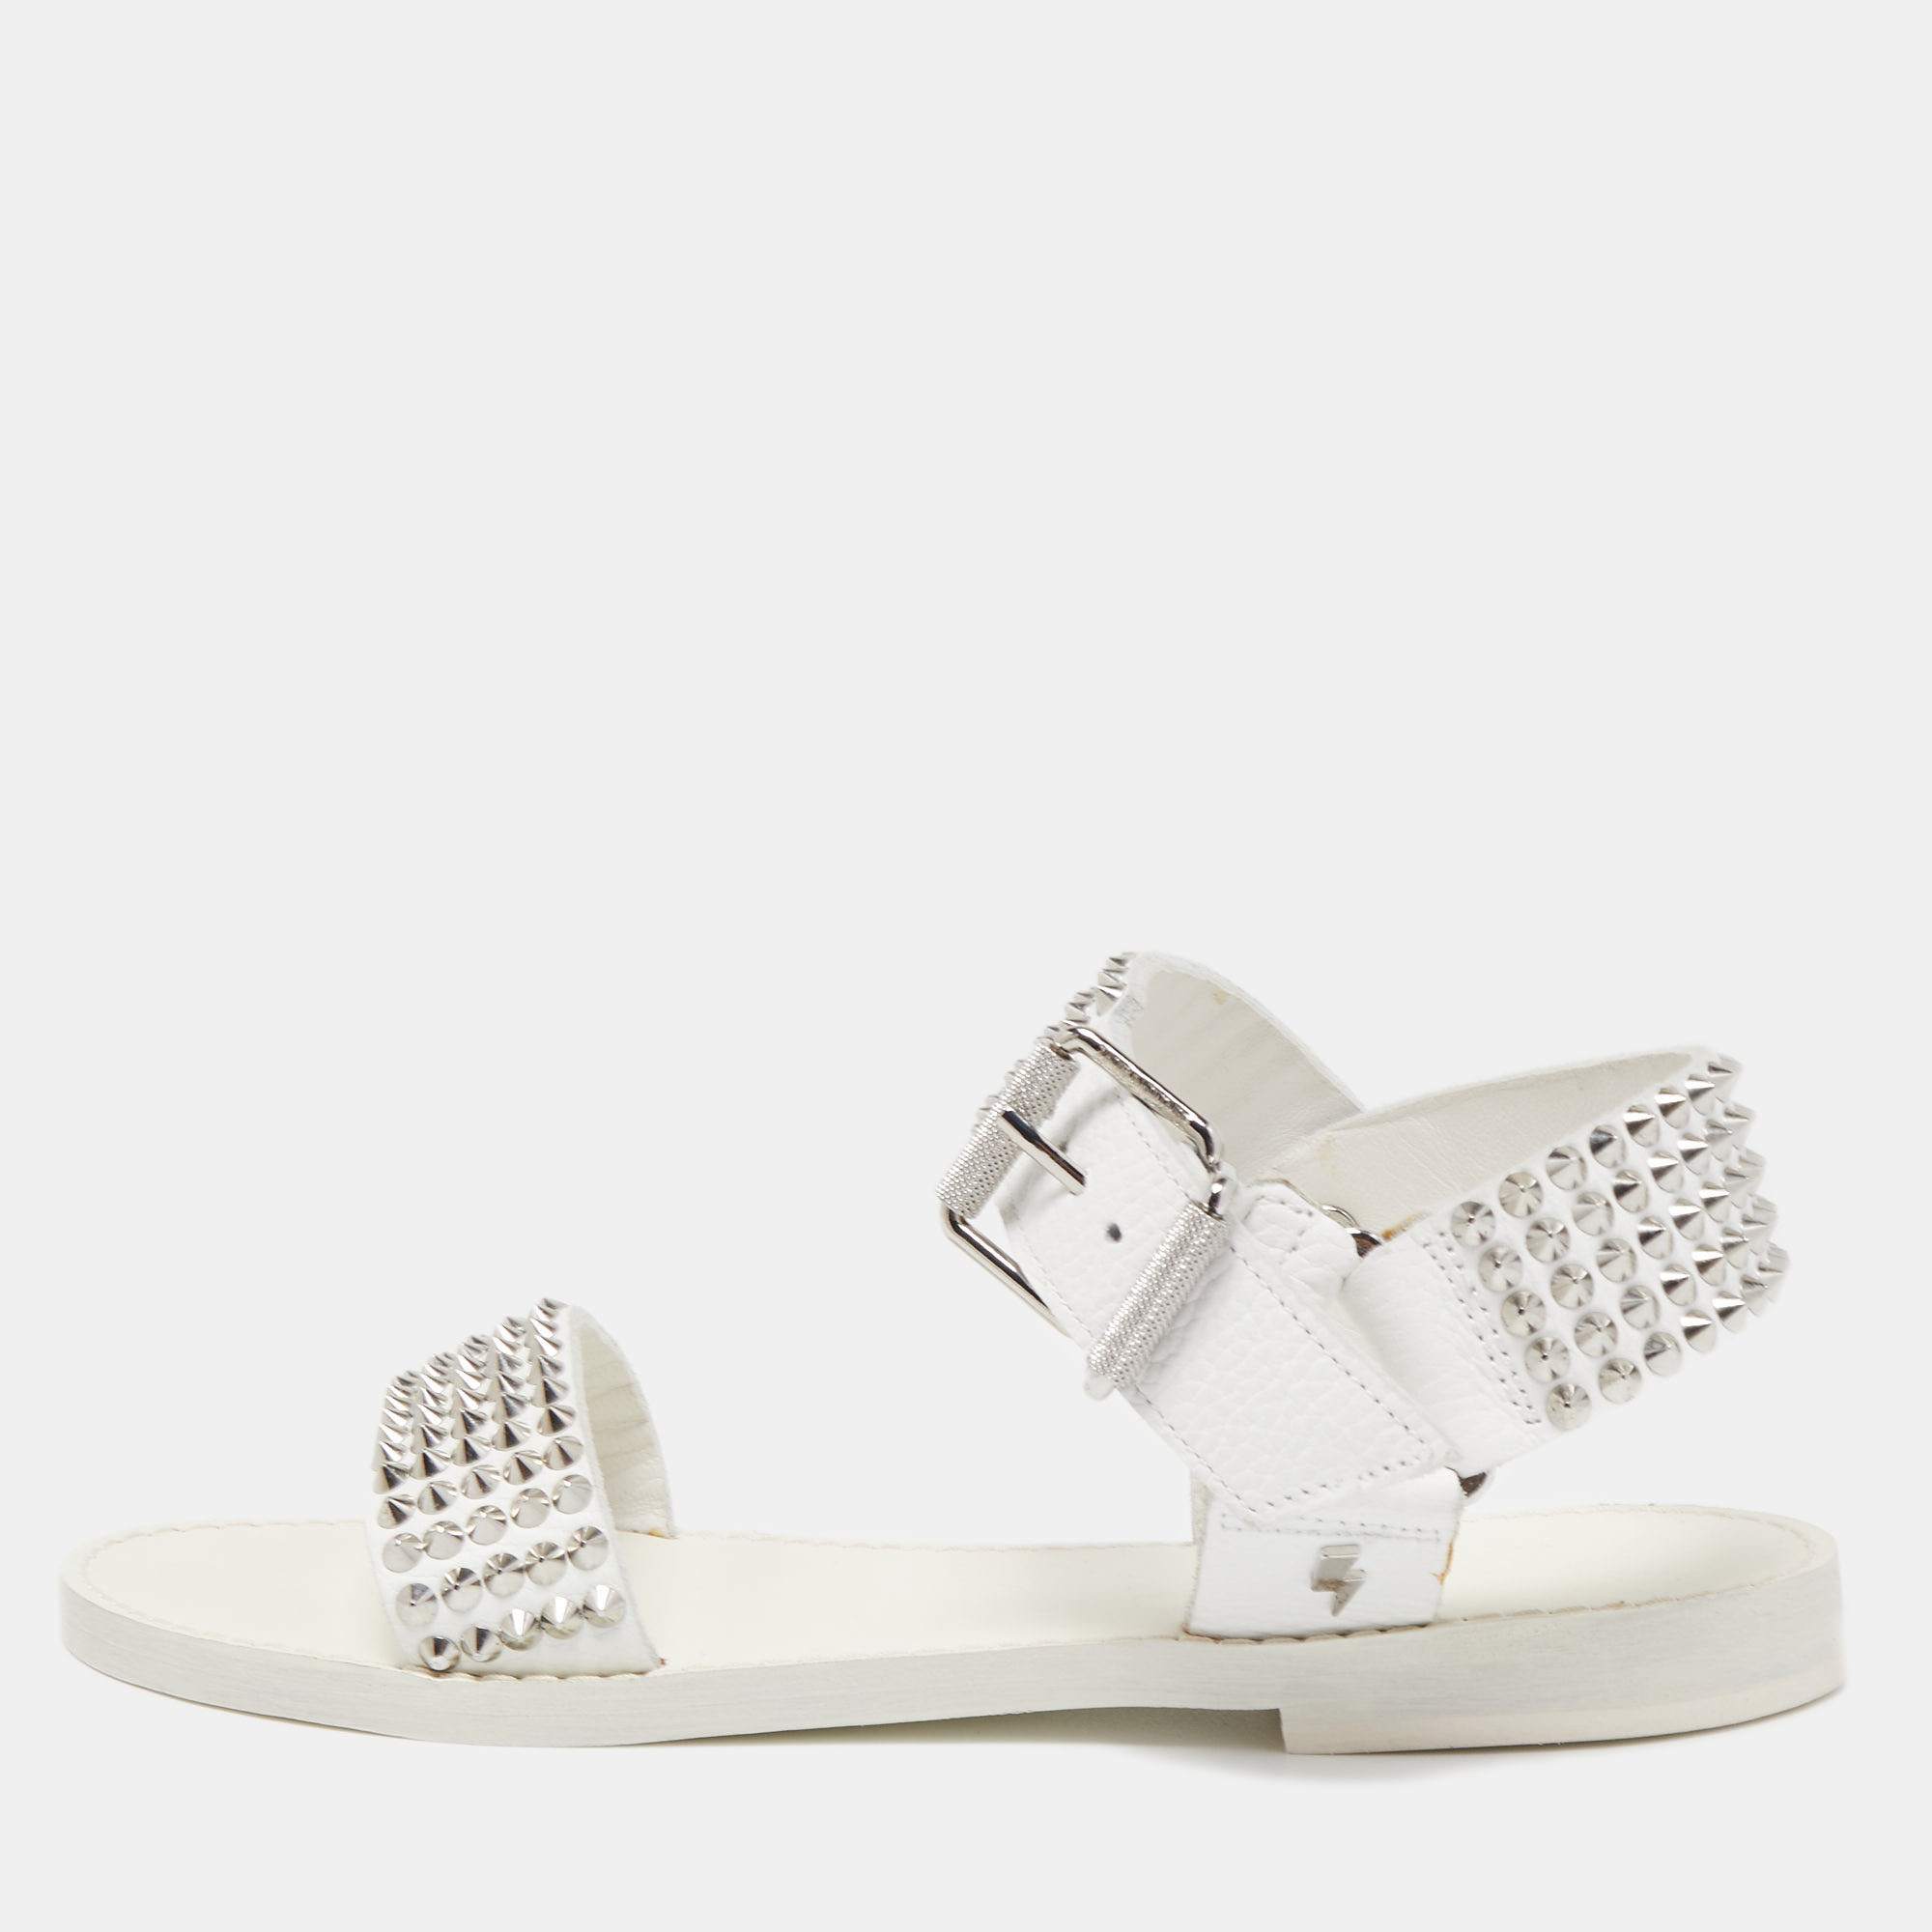 Pre-owned Zadig & Voltaire White Leather Ankle Strap Spiked Sandals Size 36